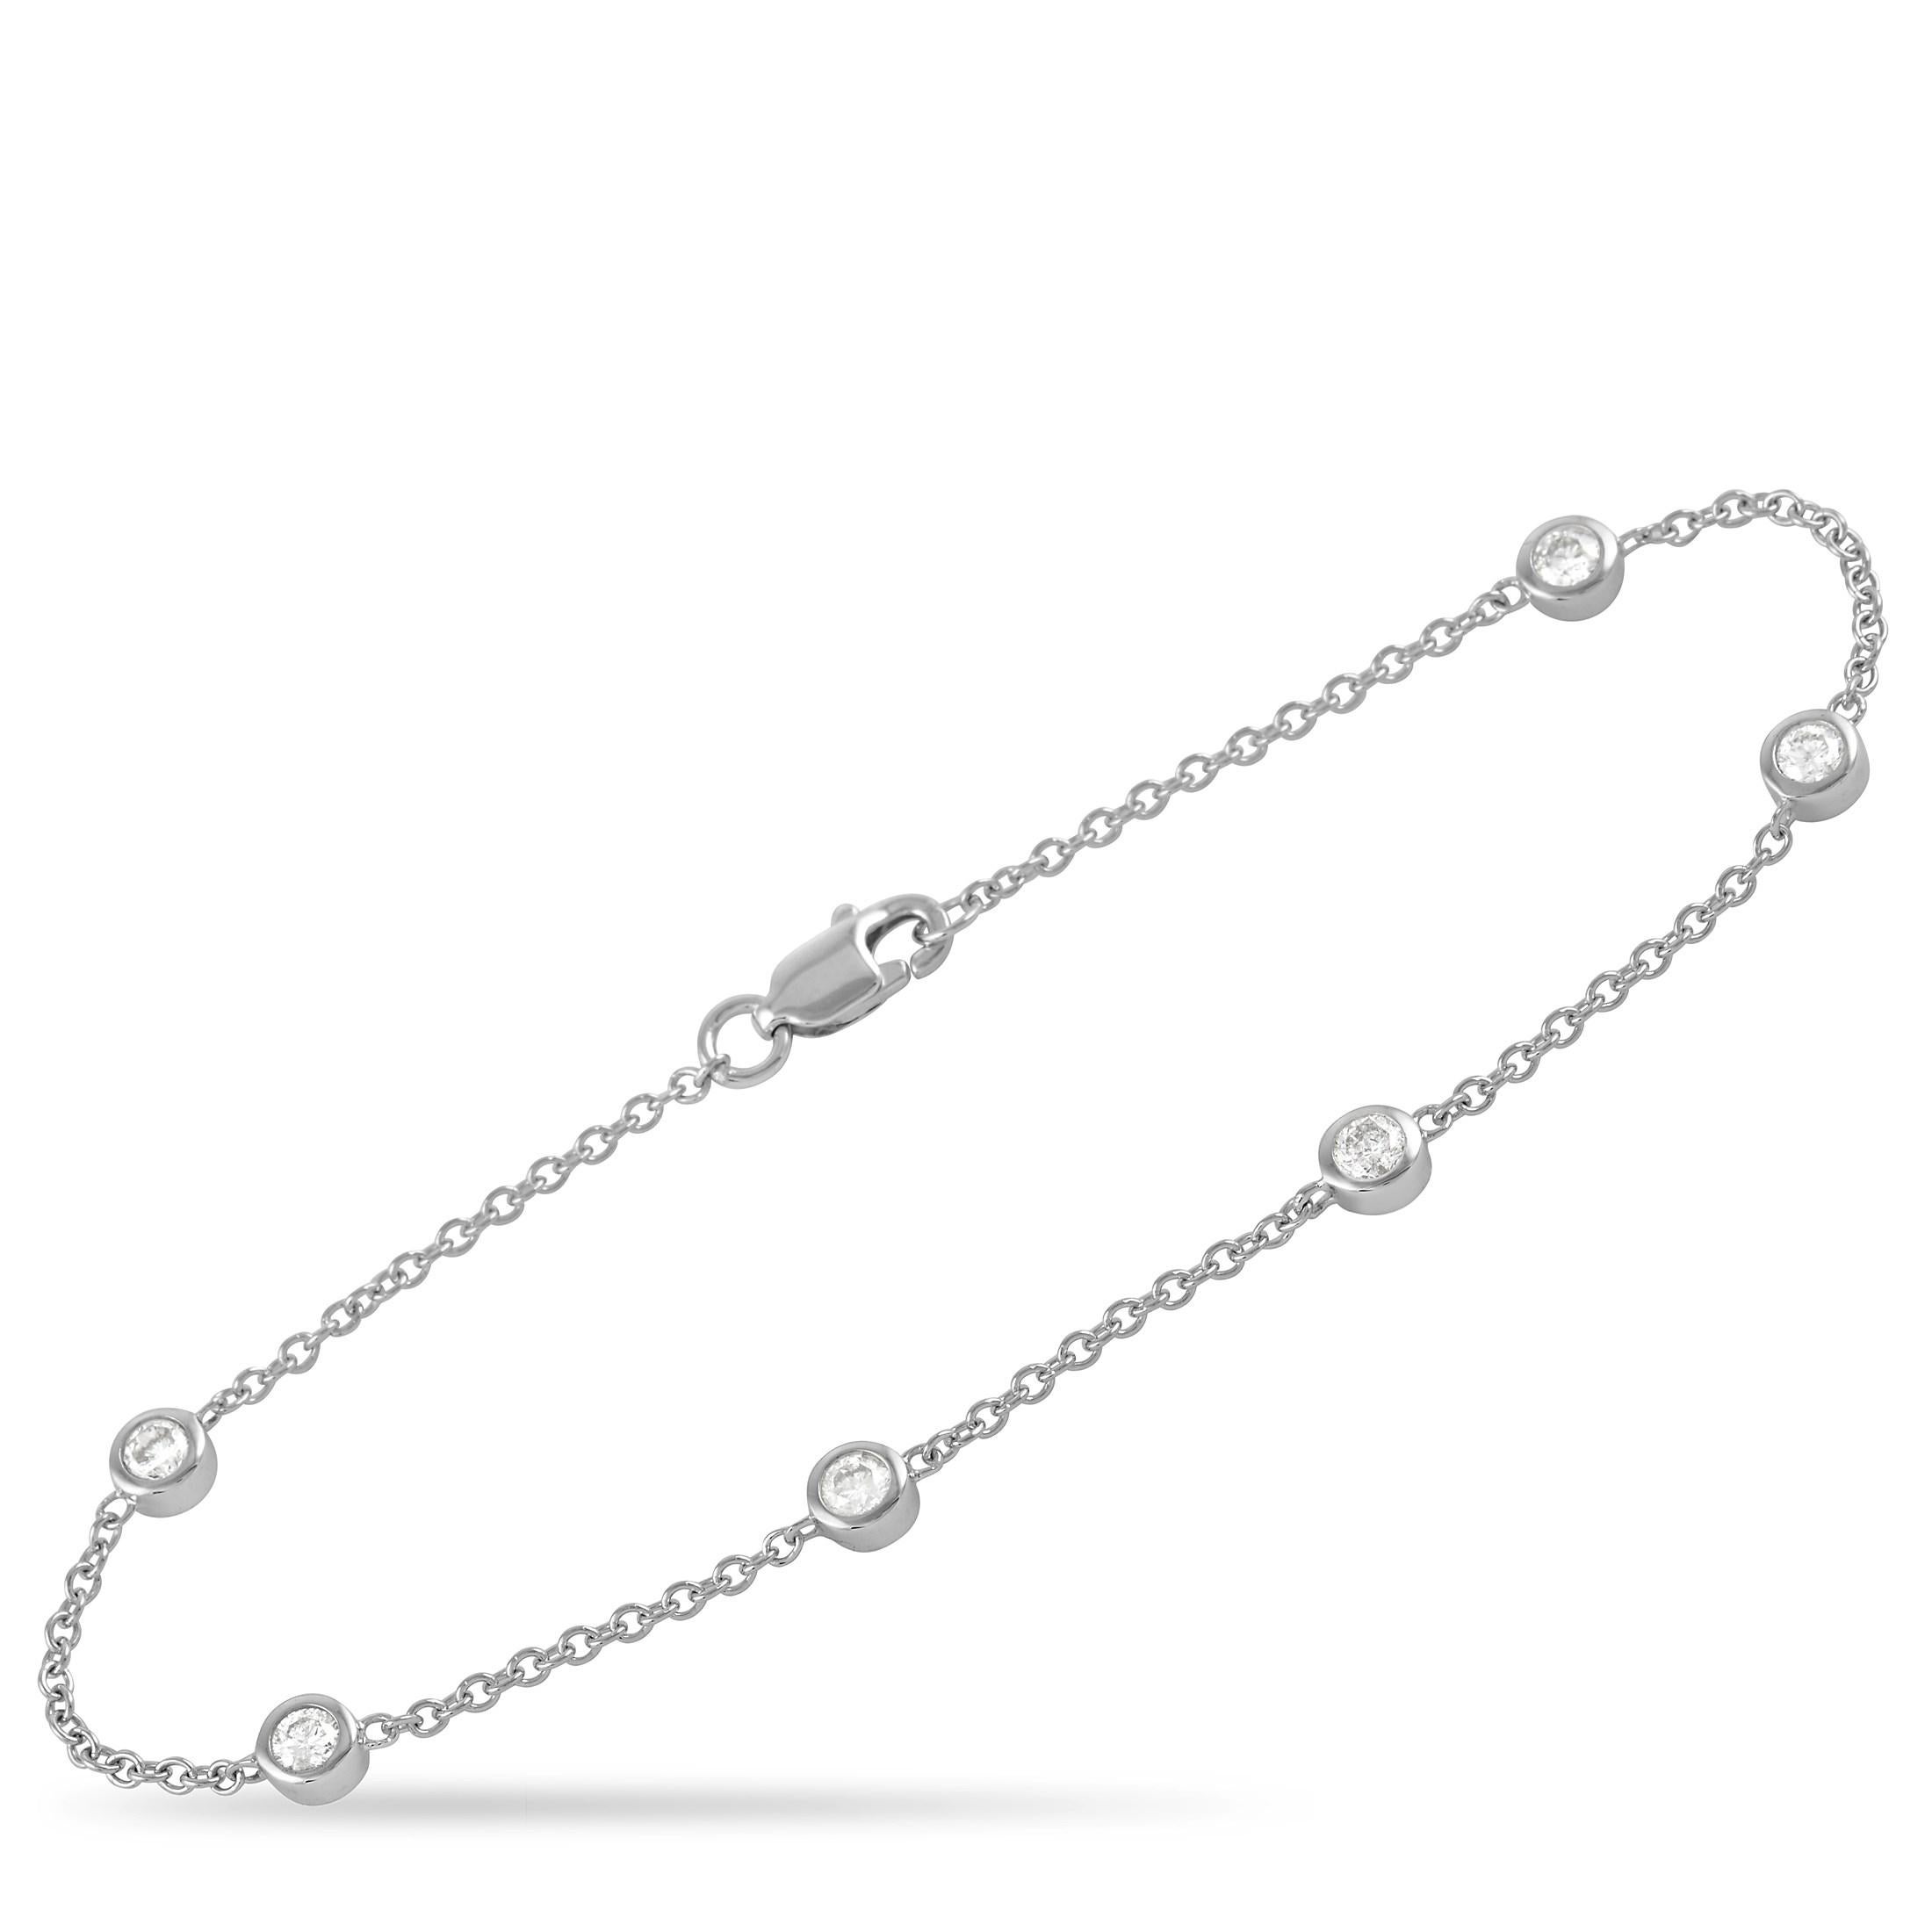 Diamonds with a total weight of 0.55 carats in a sleek bezel setting make this elegant piece truly come alive. Made from 14K White Gold, this bracelet measures 7” long and comes complete with secure lobster clasp closure. 

This jewelry piece is